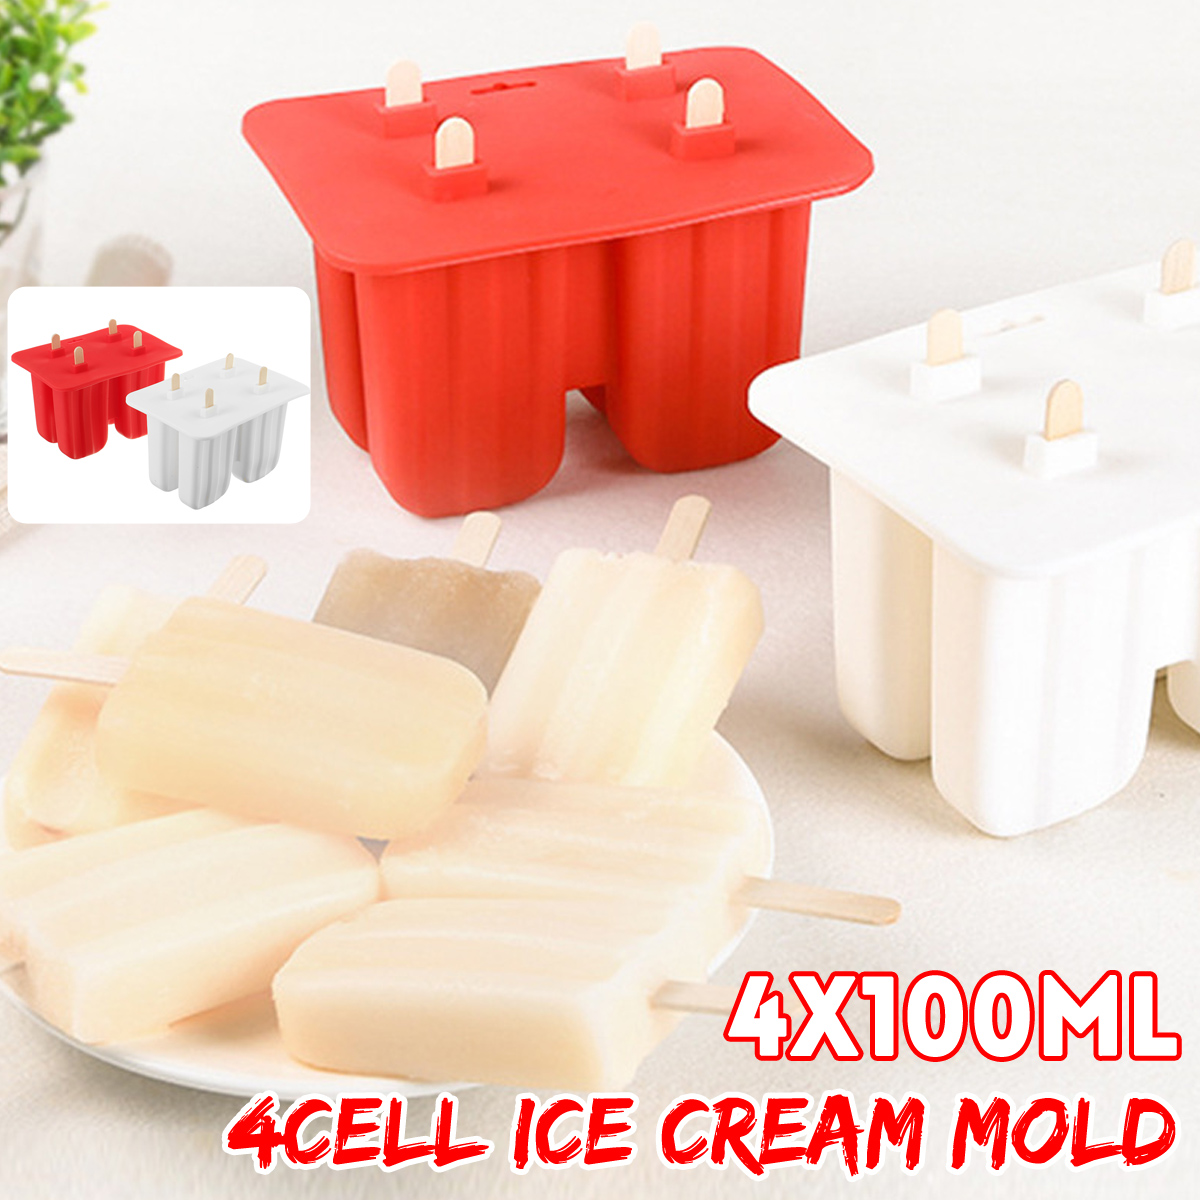 Ice-Cream-Popsicle-Molds-Tools-Rectangle-Shaped-Reusable-DIY-Frozen-Ice-Cream-Baking-Mold-for-Kitche-1811798-3